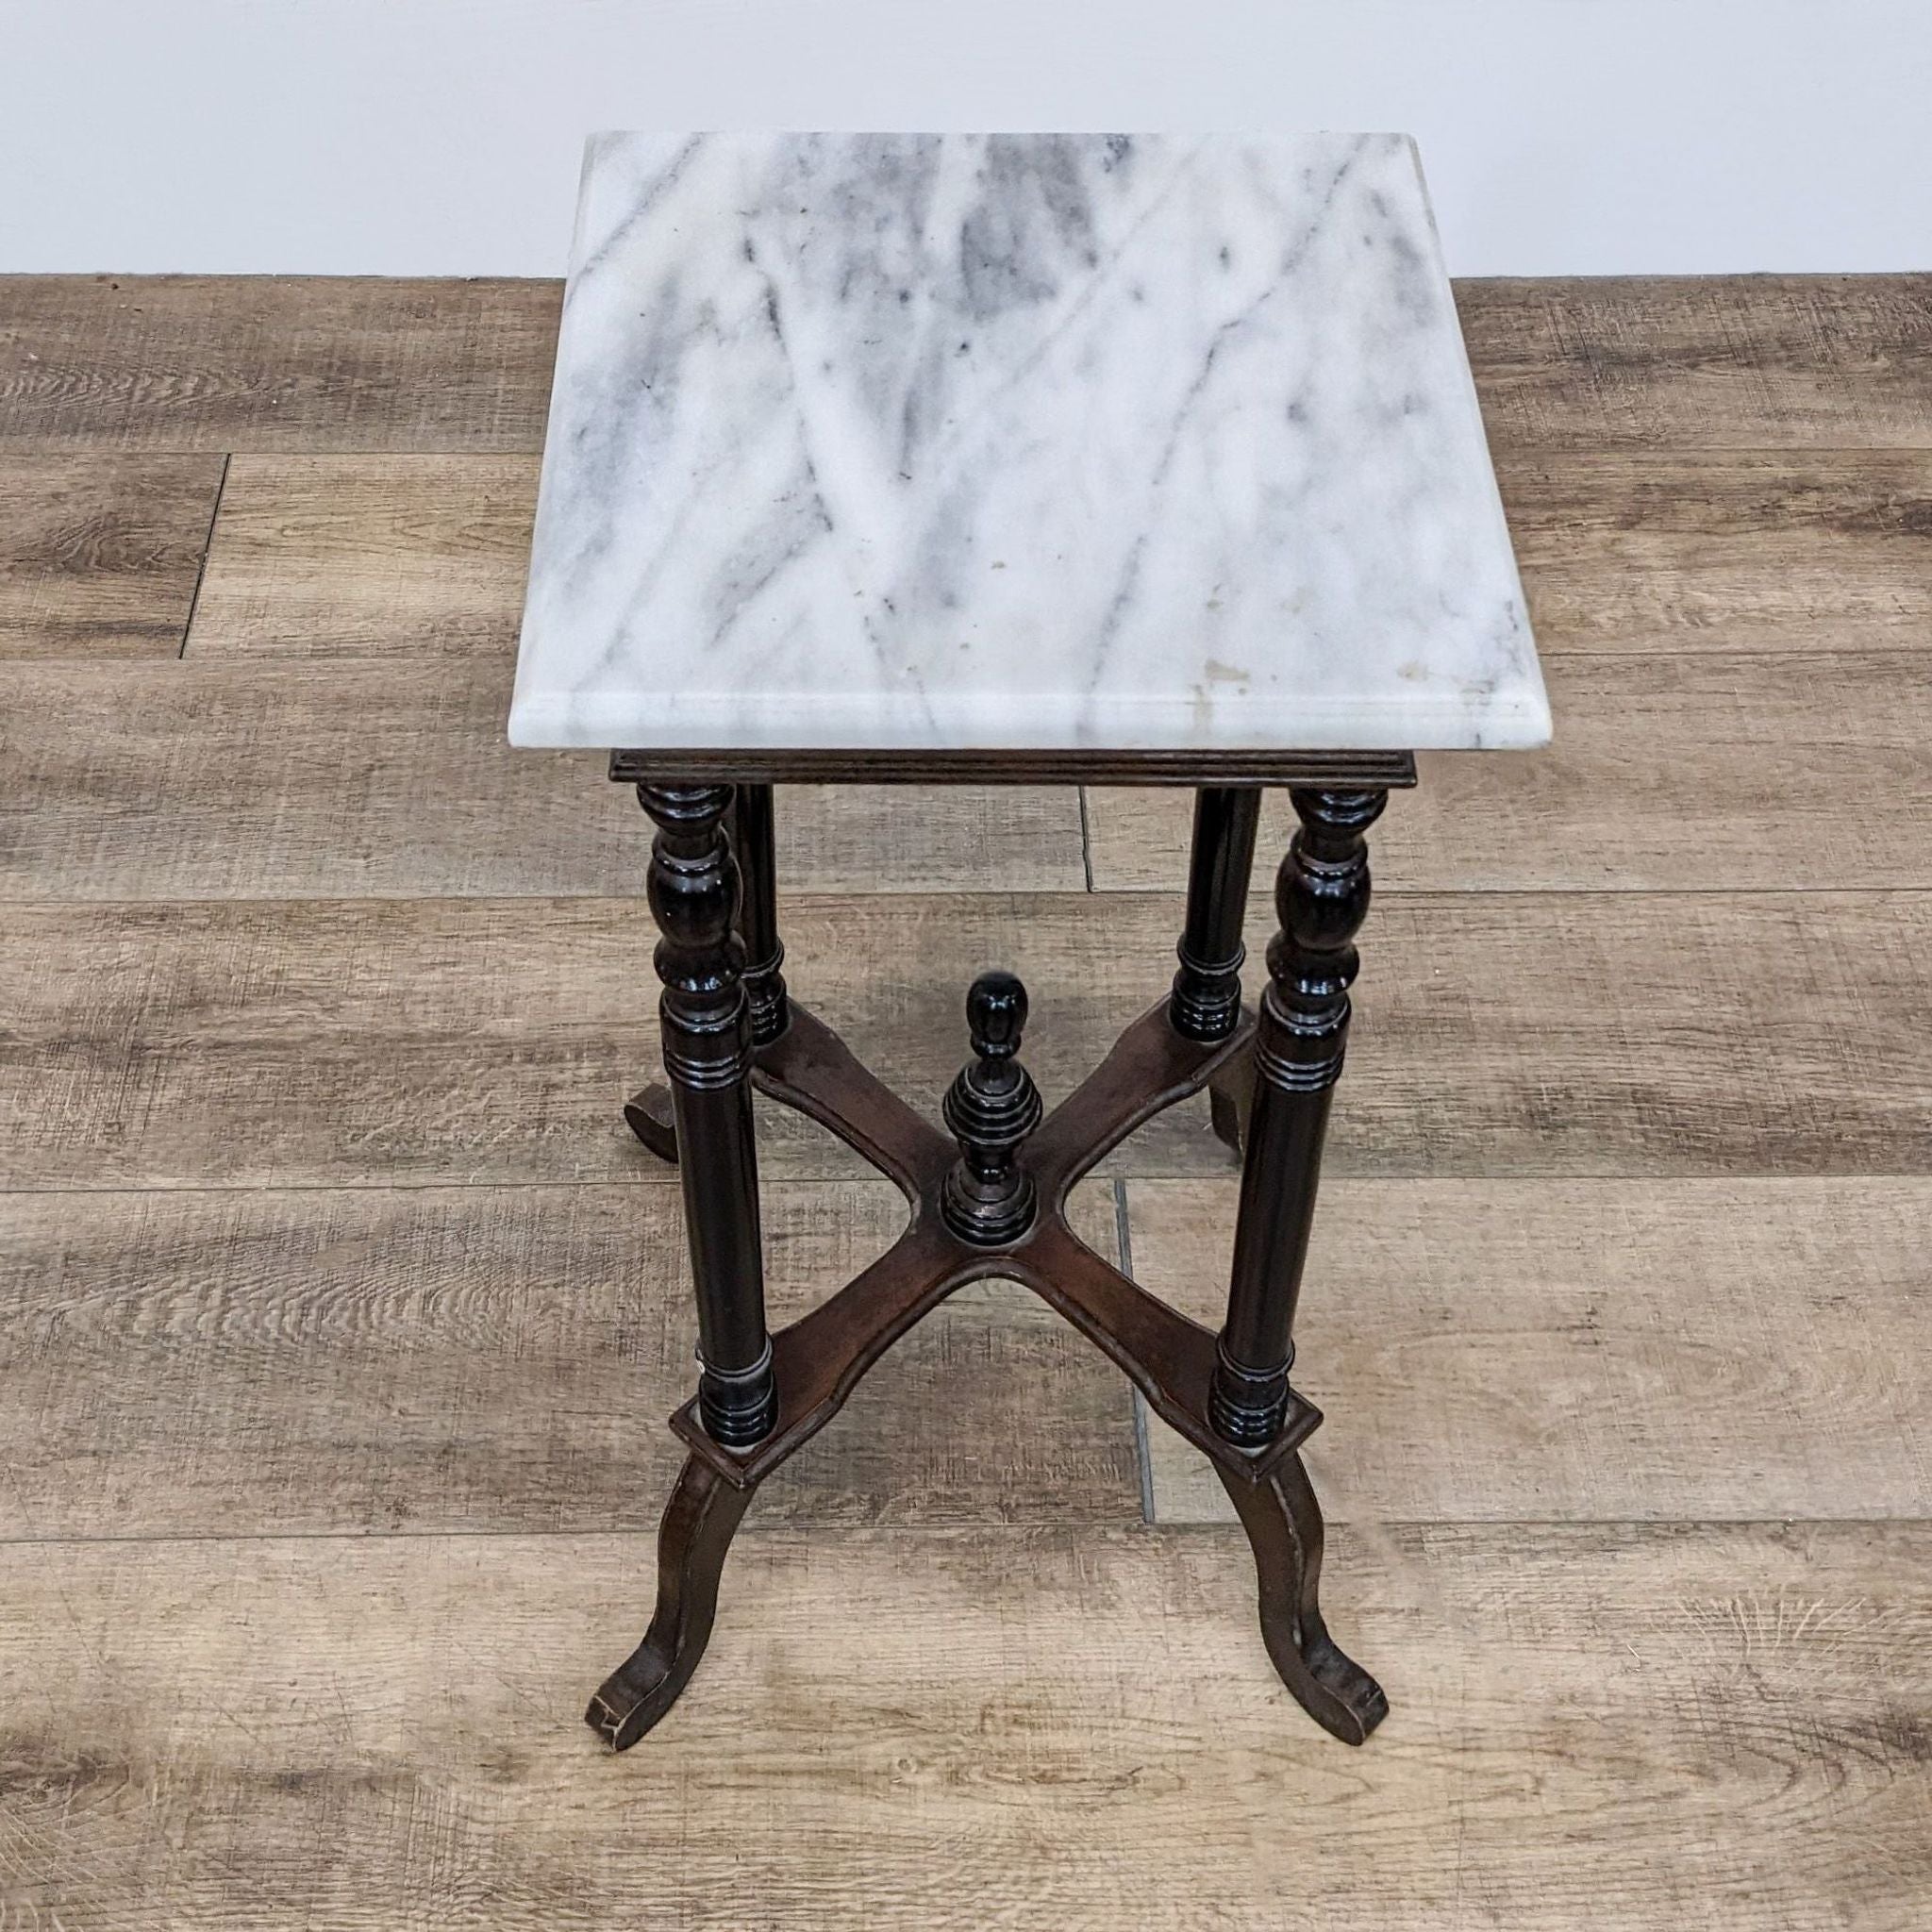 Elegant Reperch console table featuring a marble surface and ornate wood legs with finial.